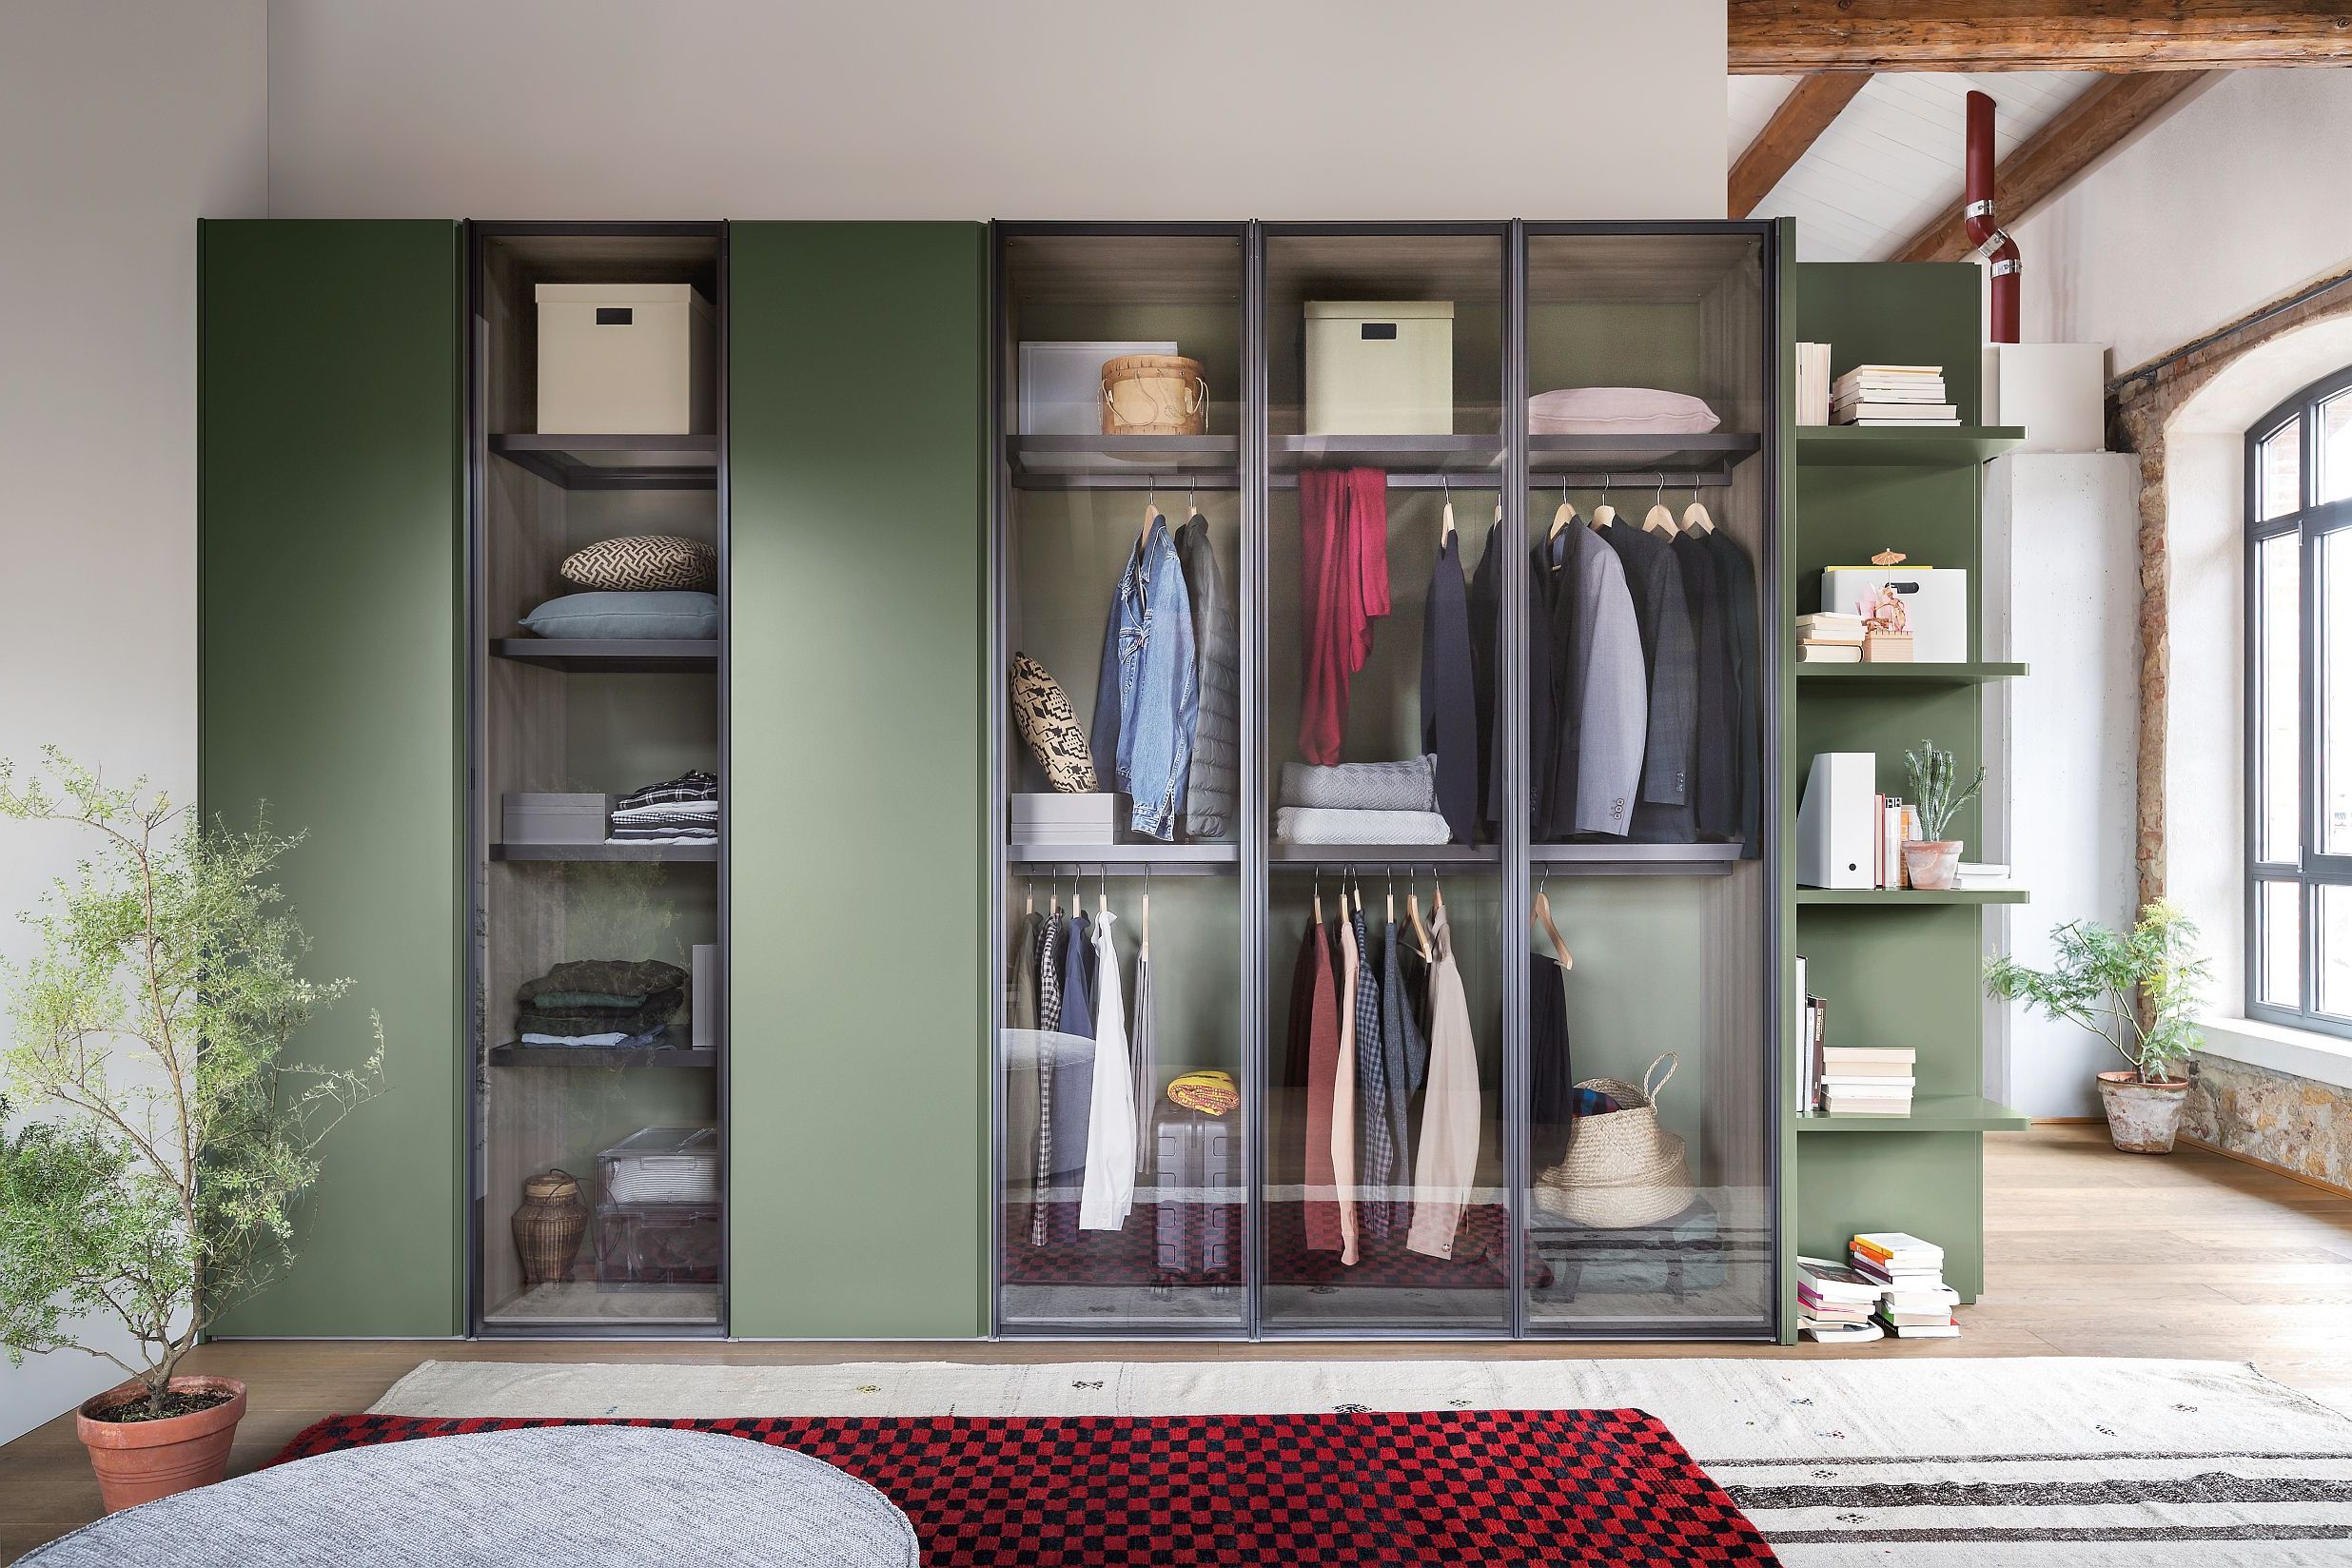 15 Fabulous Built In Wardrobe Ideas For All Interior Styles | Real Homes For Wardrobes With 4 Shelves (Gallery 15 of 20)